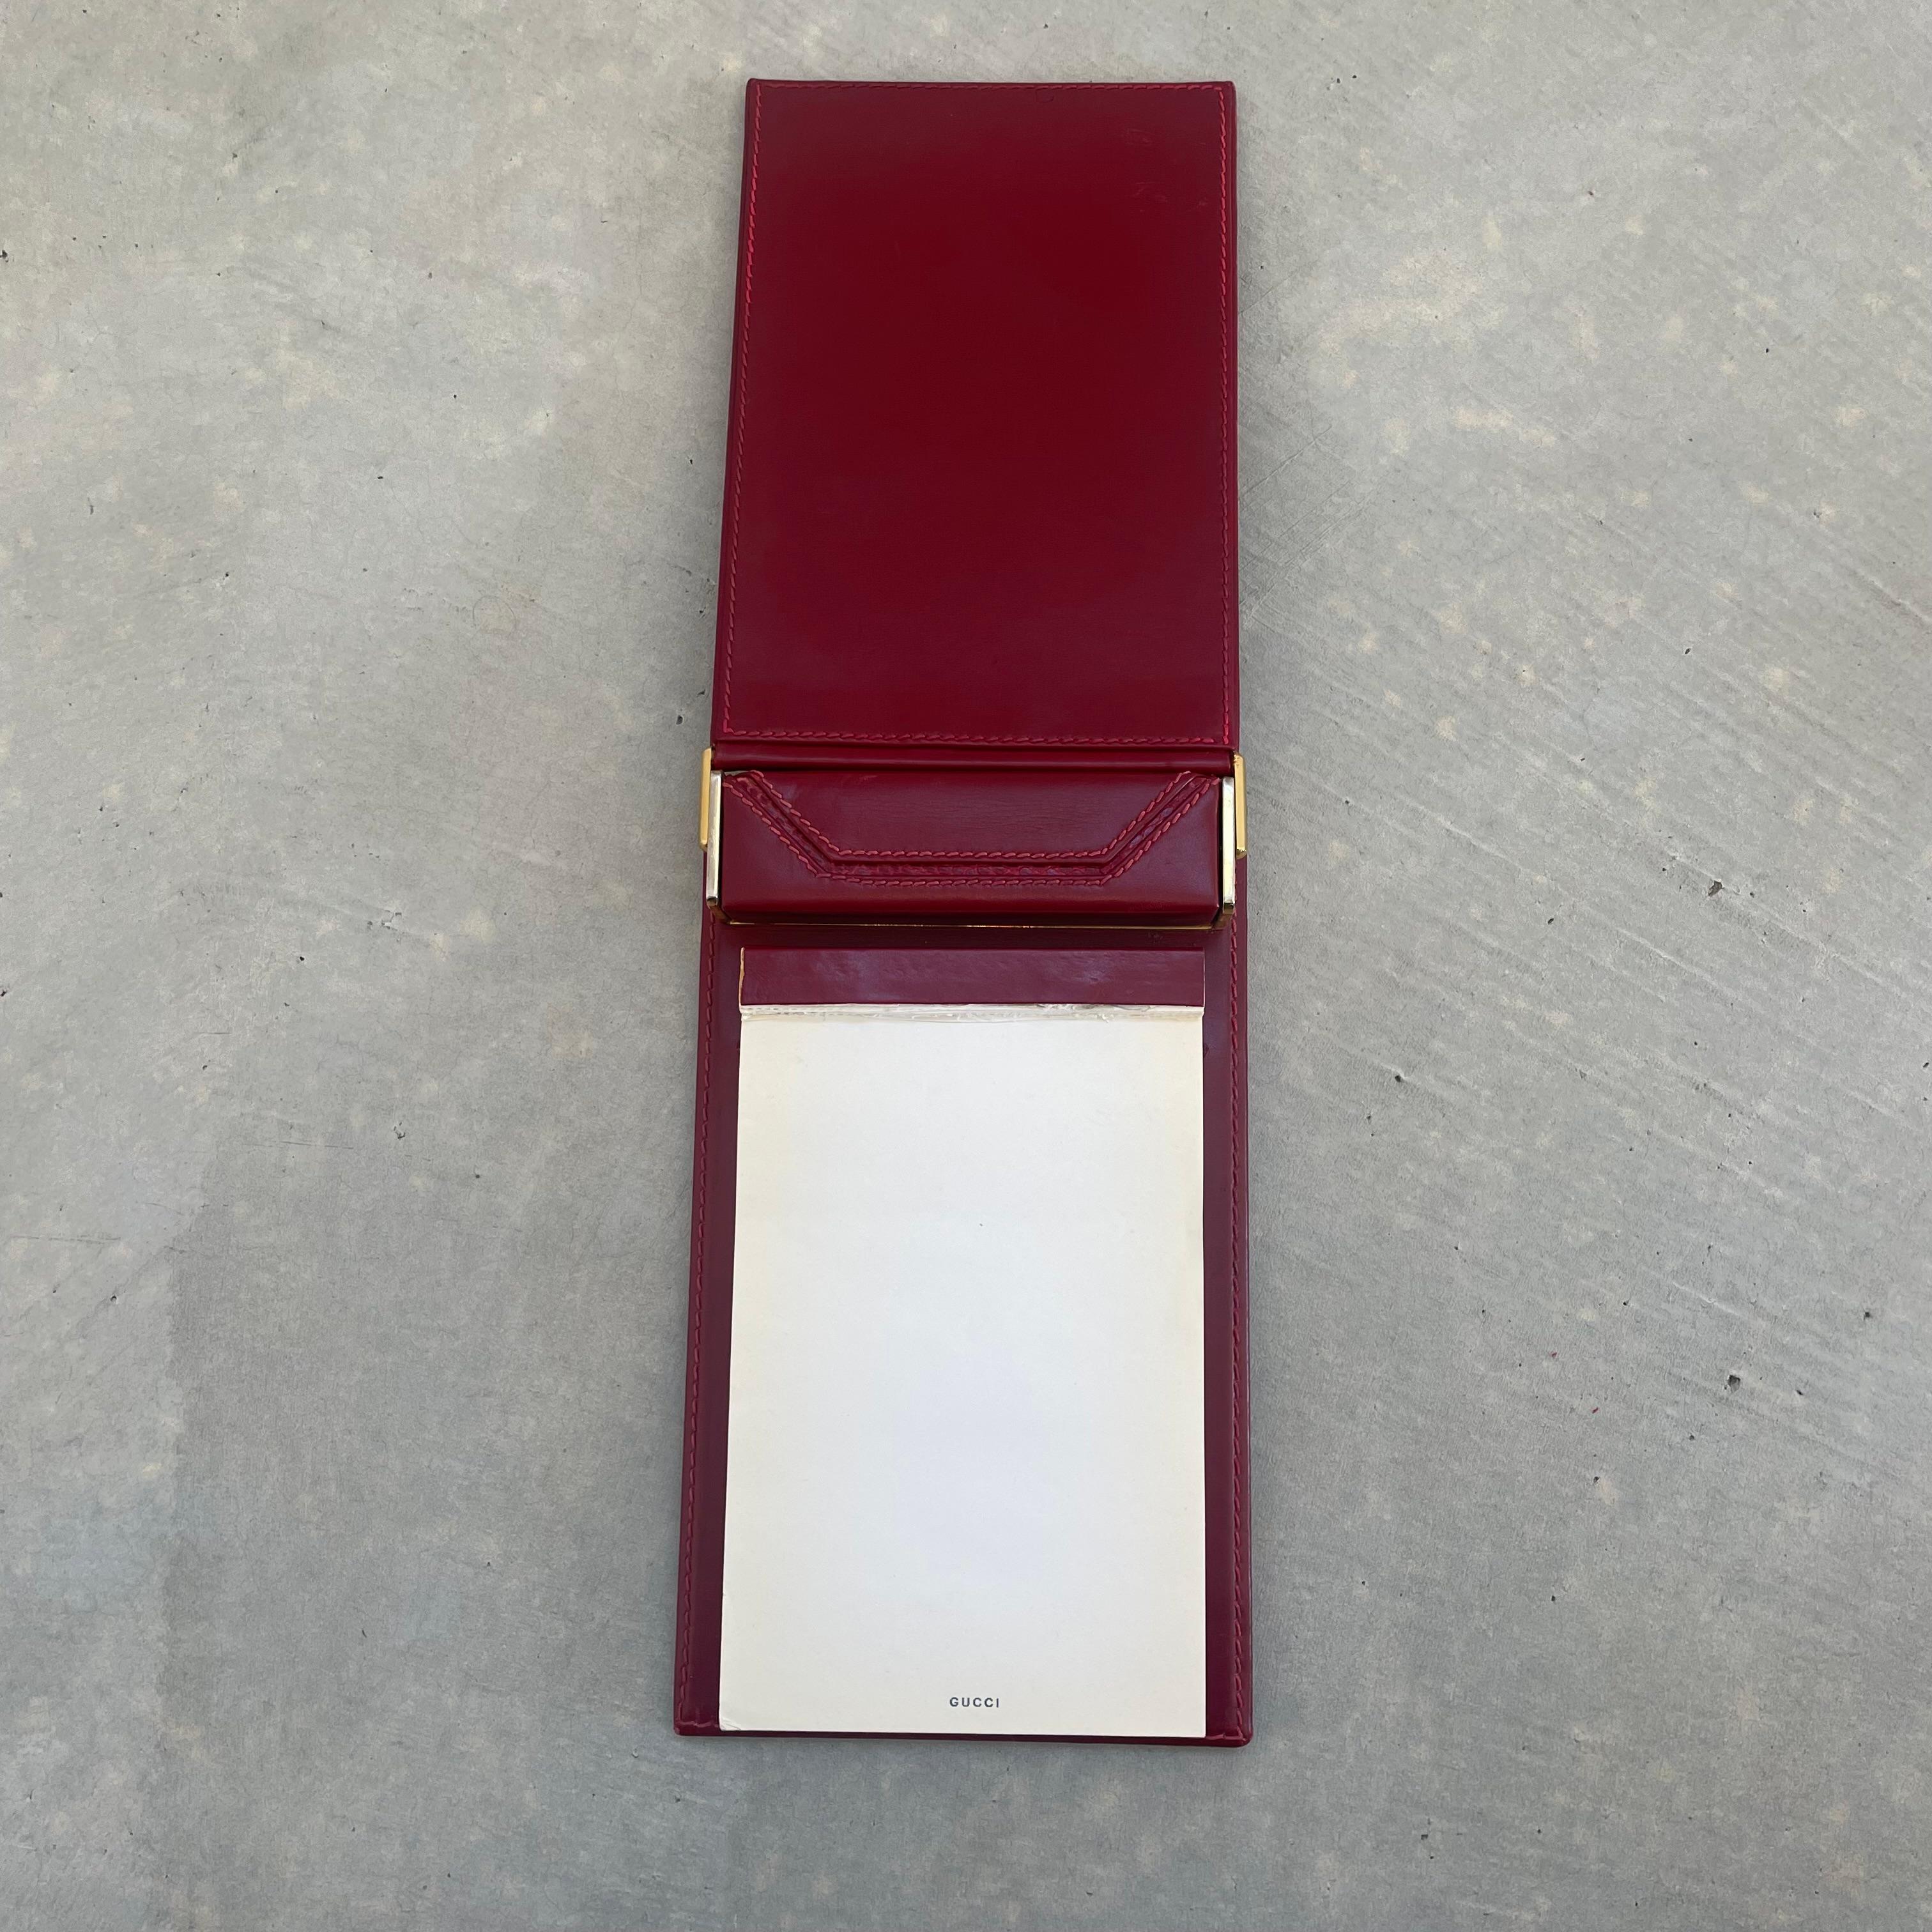 Gucci Red Leather Desk Set, 1980s Italy For Sale 11